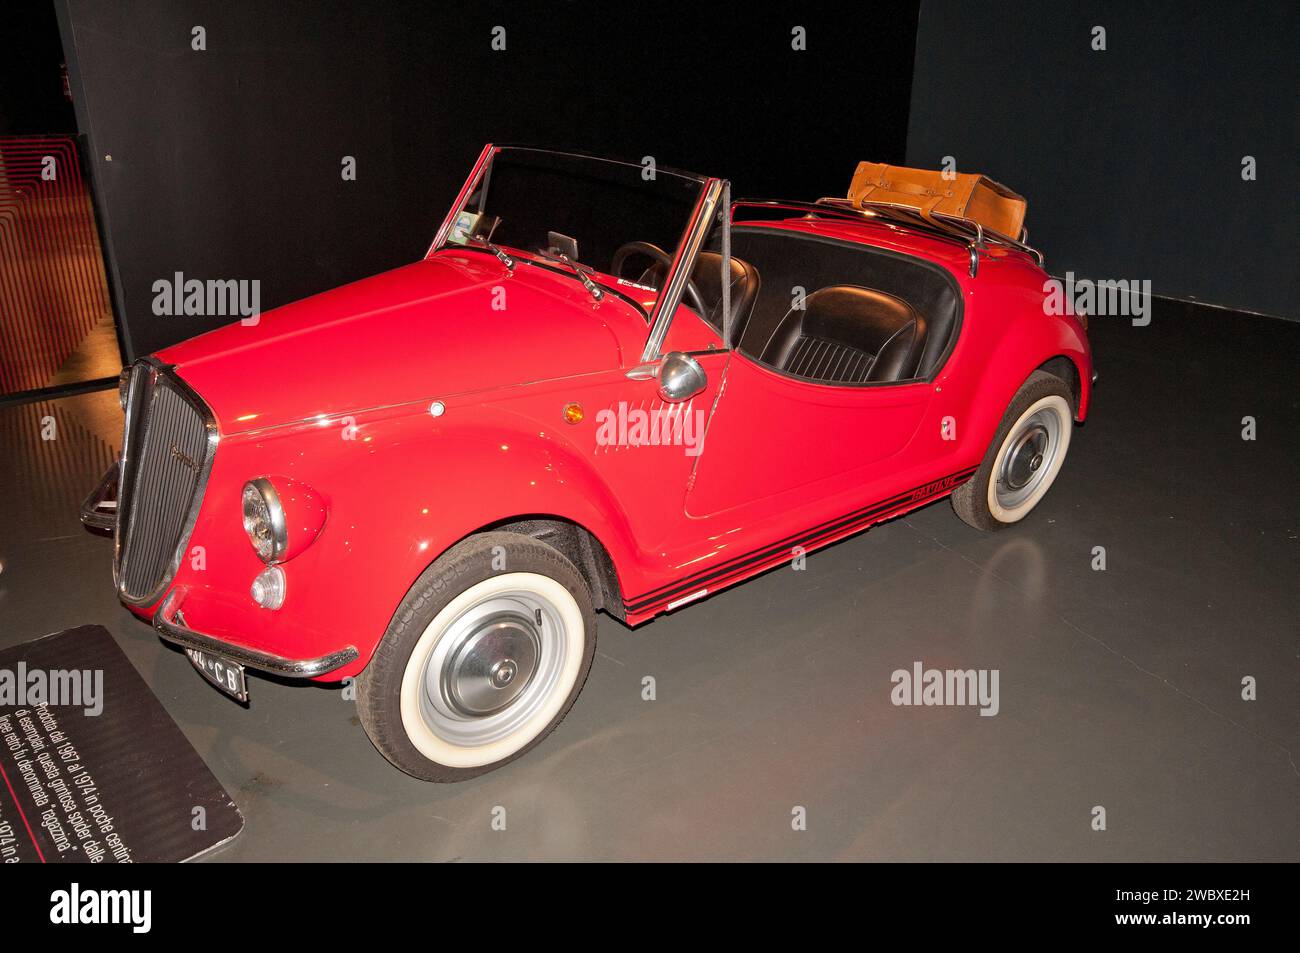 Fiat 500 F Gamine Vignale (Italy 1968), Museo Nazionale dell'Automobile (MAUTO), National Car Museum (since 1933), Turin, Piedmont, Italy Stock Photo